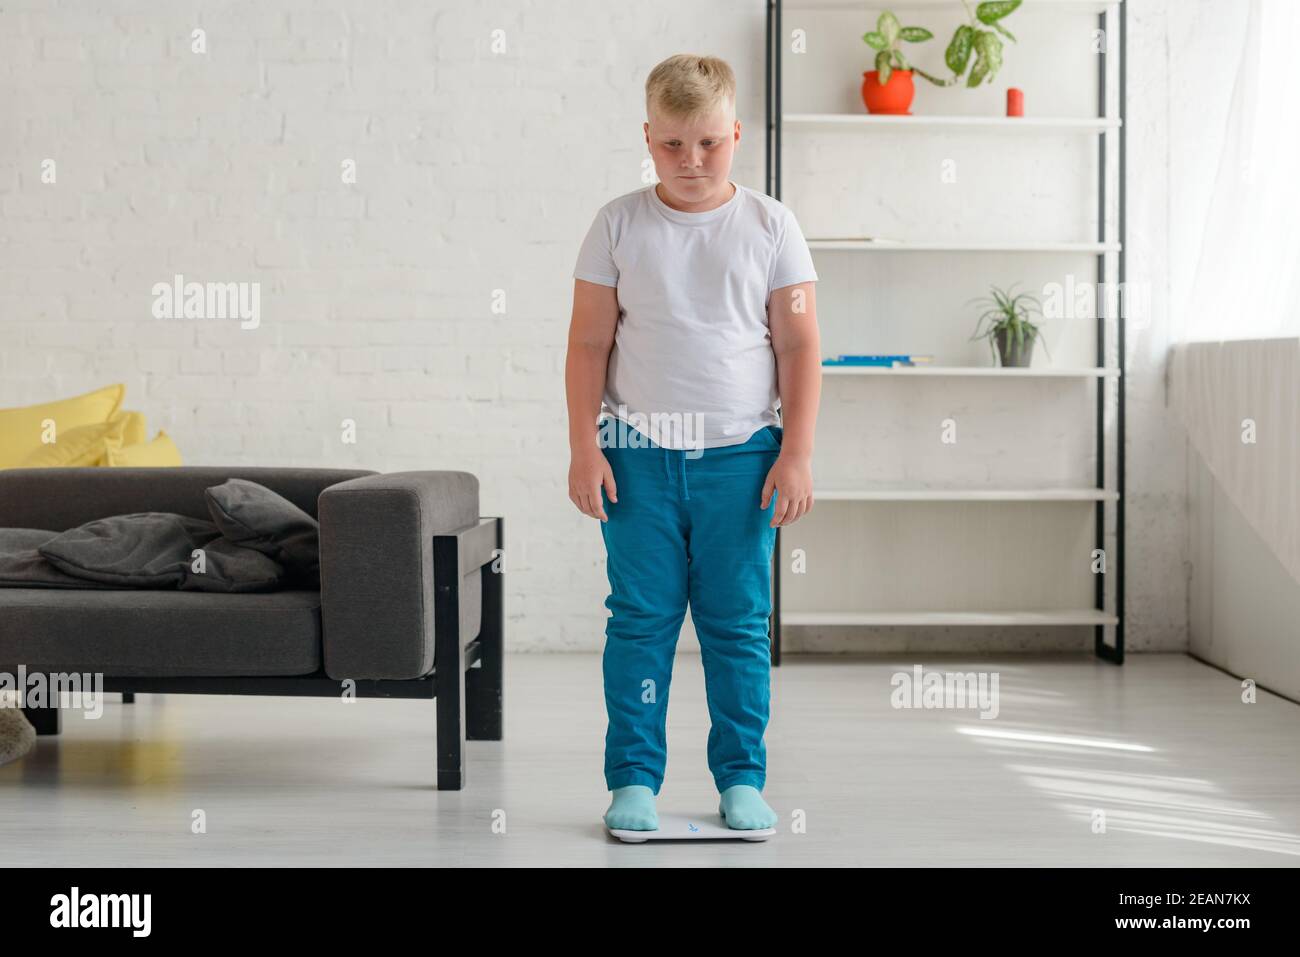 Obese boy disappointed after weighing and discovered that he gained weight Stock Photo